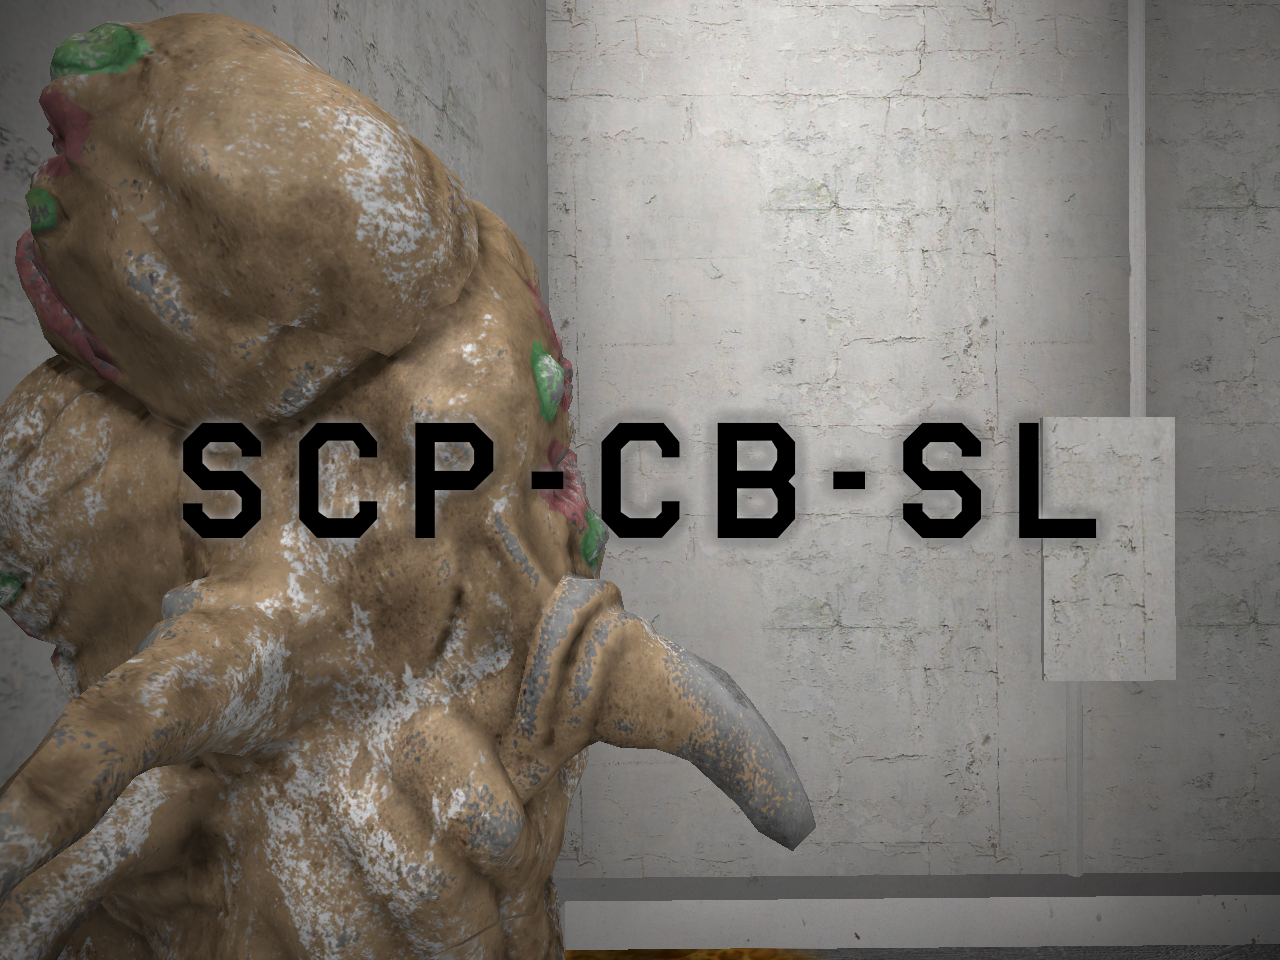 File:SCP CB First encounter of SCP-173.png - Wikipedia